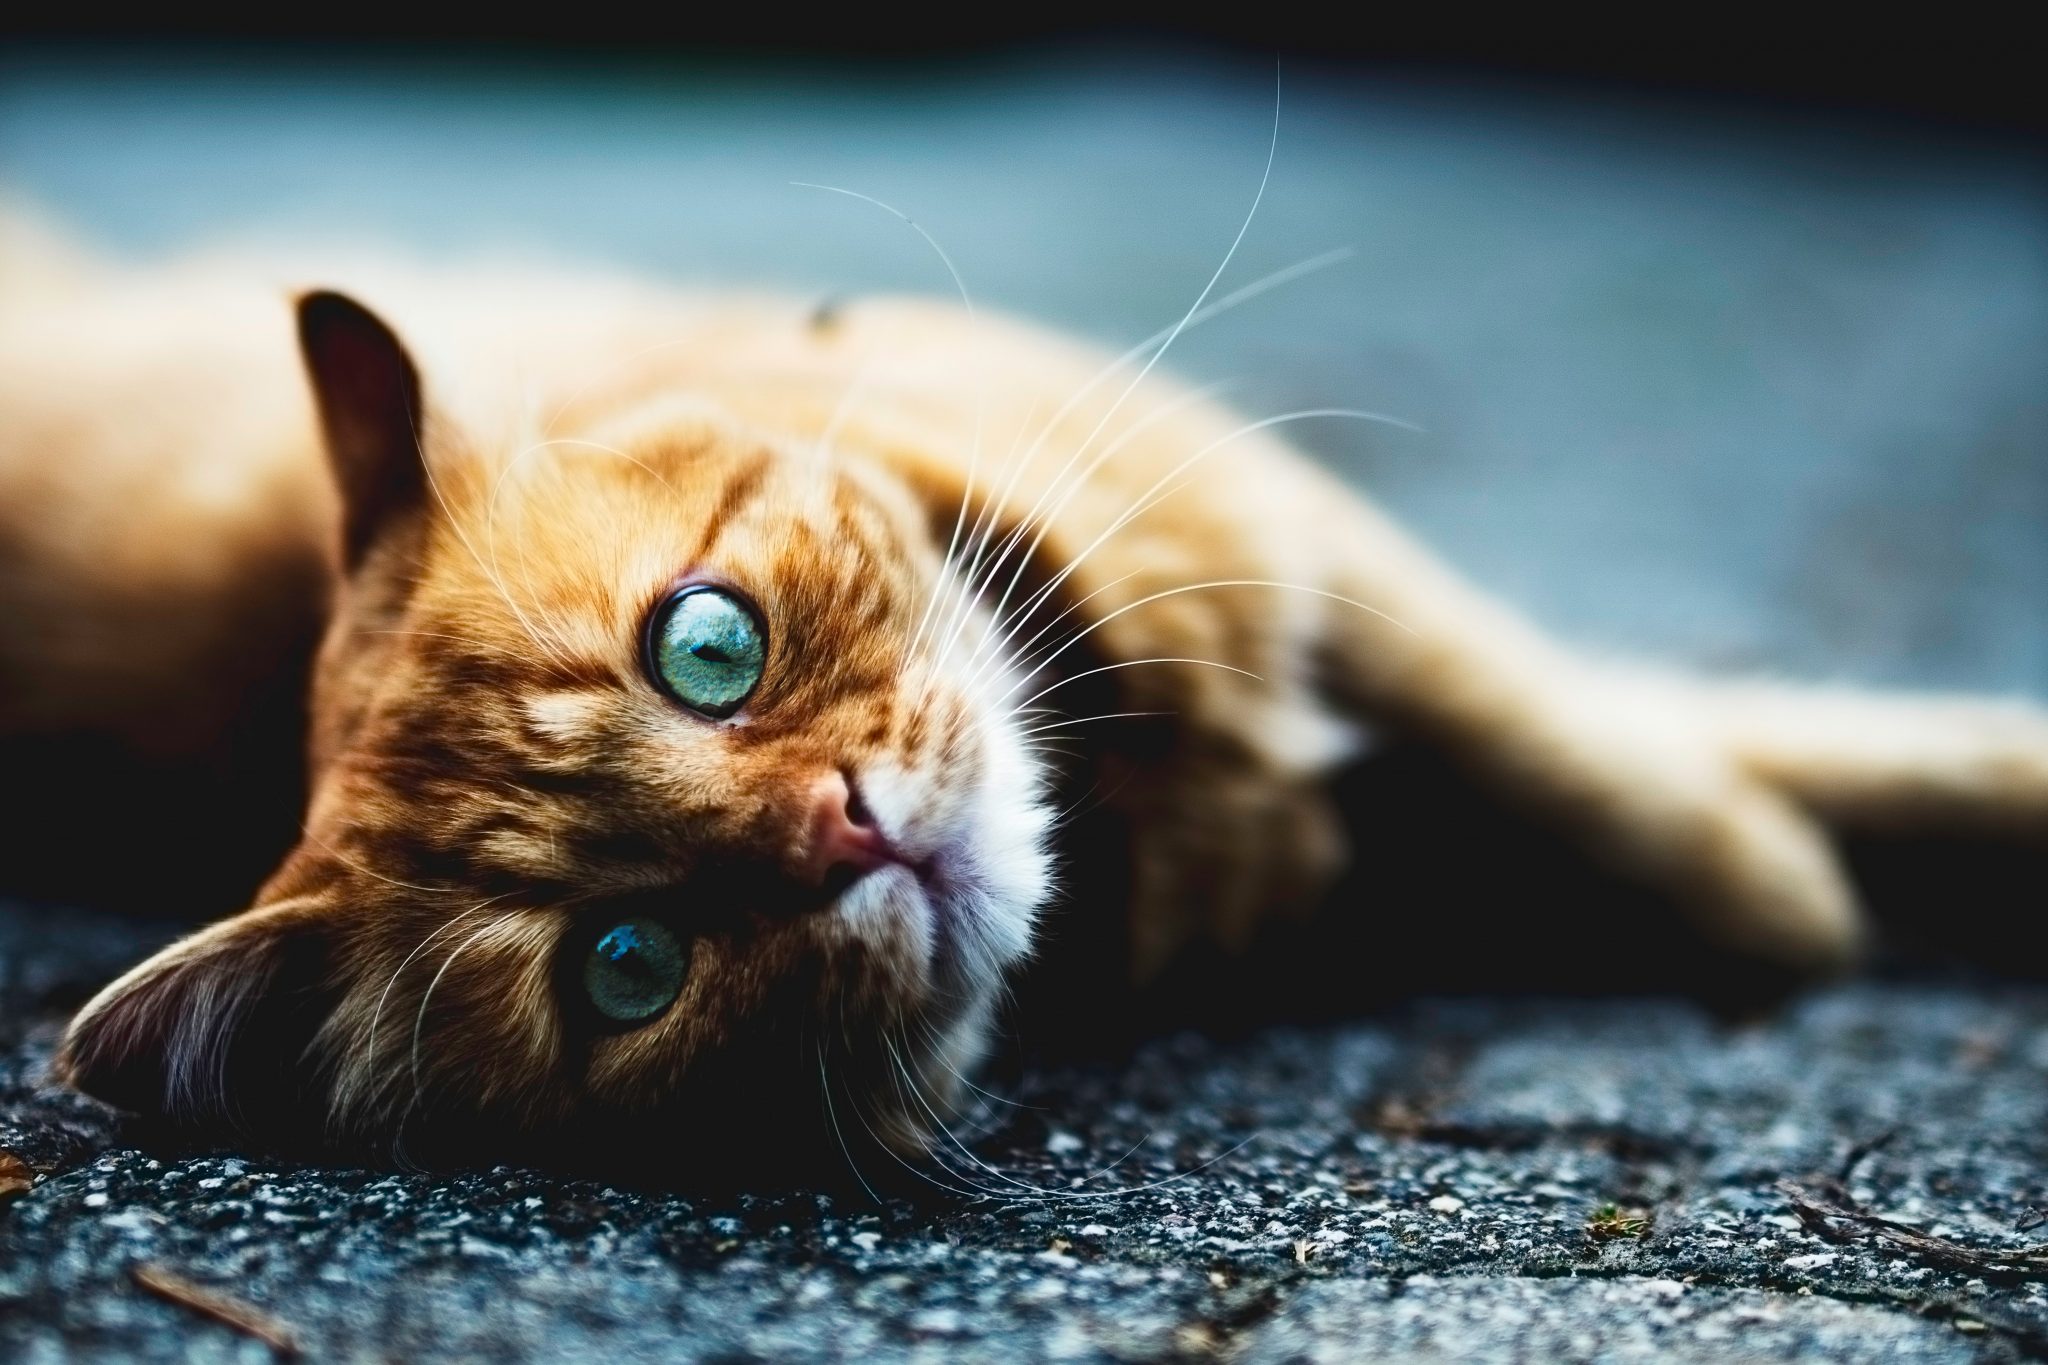 Ginger cat lying on floor - crazy cat facts